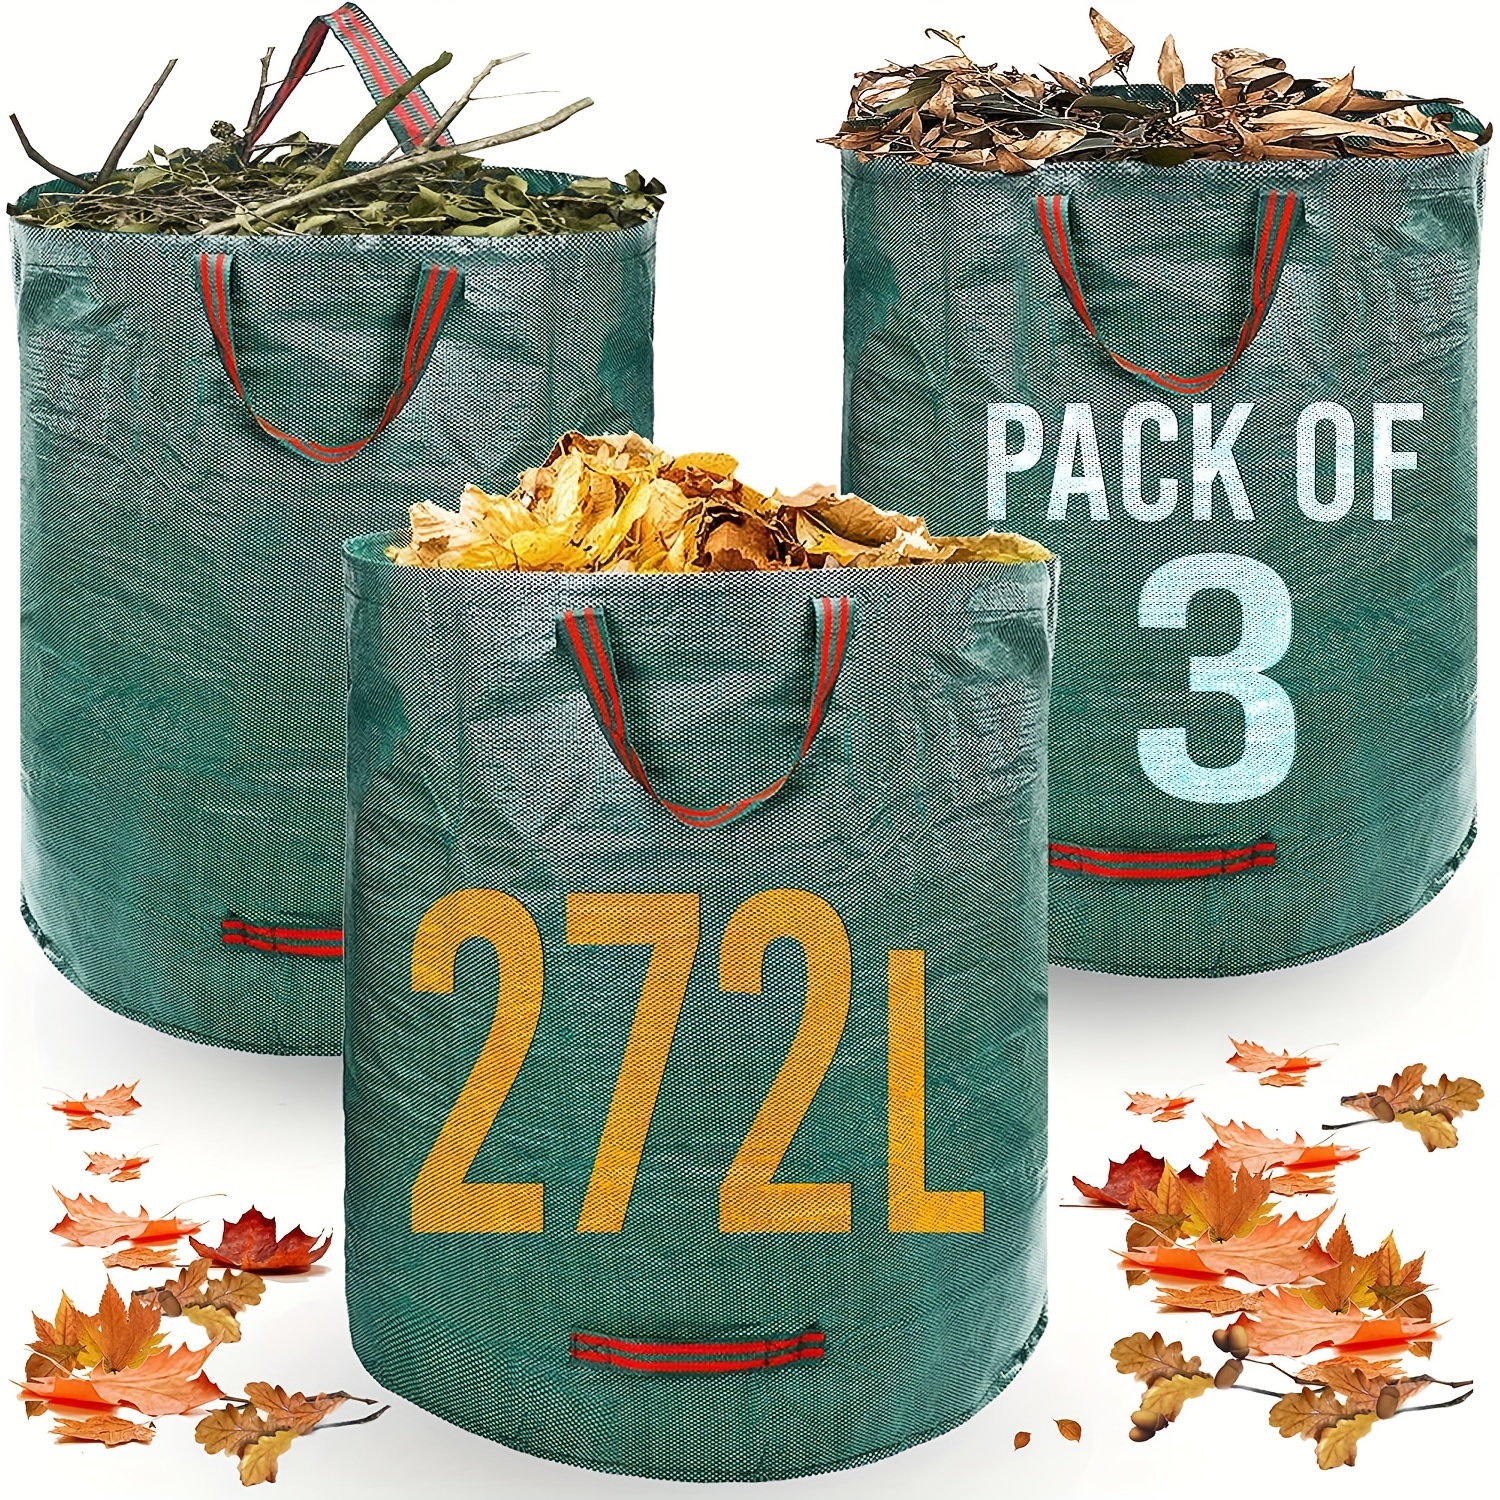 Garnen [2 Pack] 72 Gallon Garden Waste Bags, Heavy Duty Reusable / Collapsible Leaf Bags with 4 Reinforced Handles for Lawn Yard Pool Plant Trash